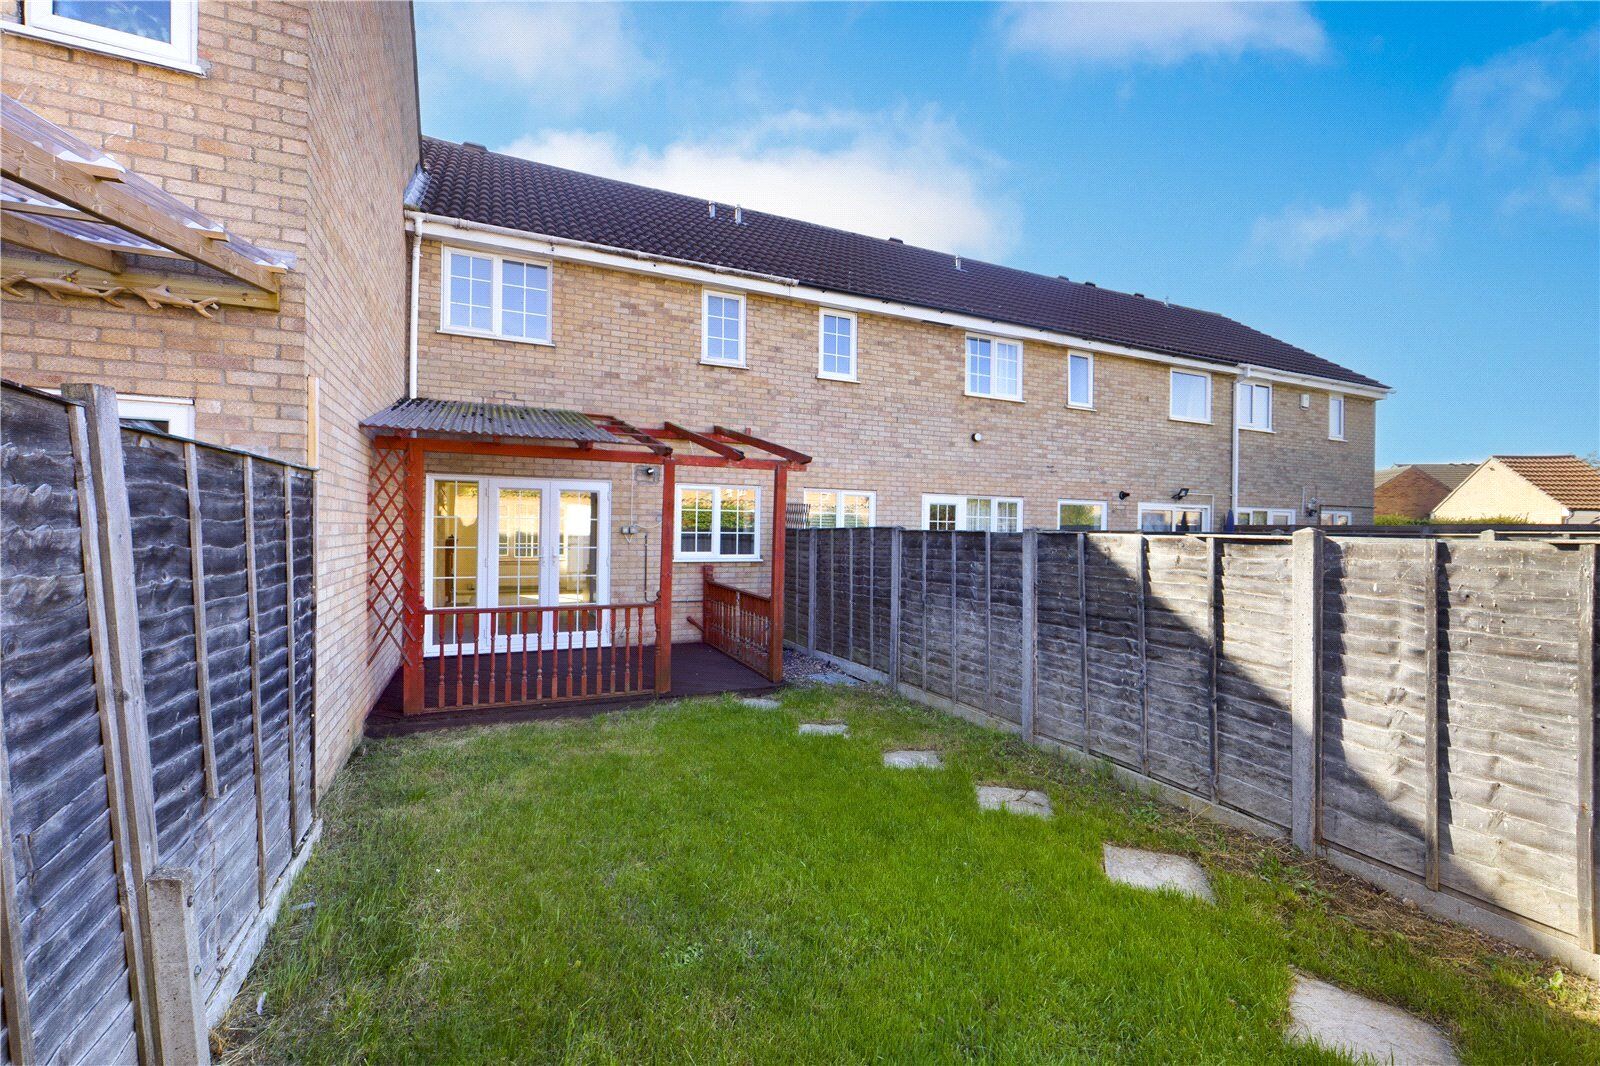 3 bedroom mid terraced house to rent, Available now Nene Way, St Ives, PE27, main image